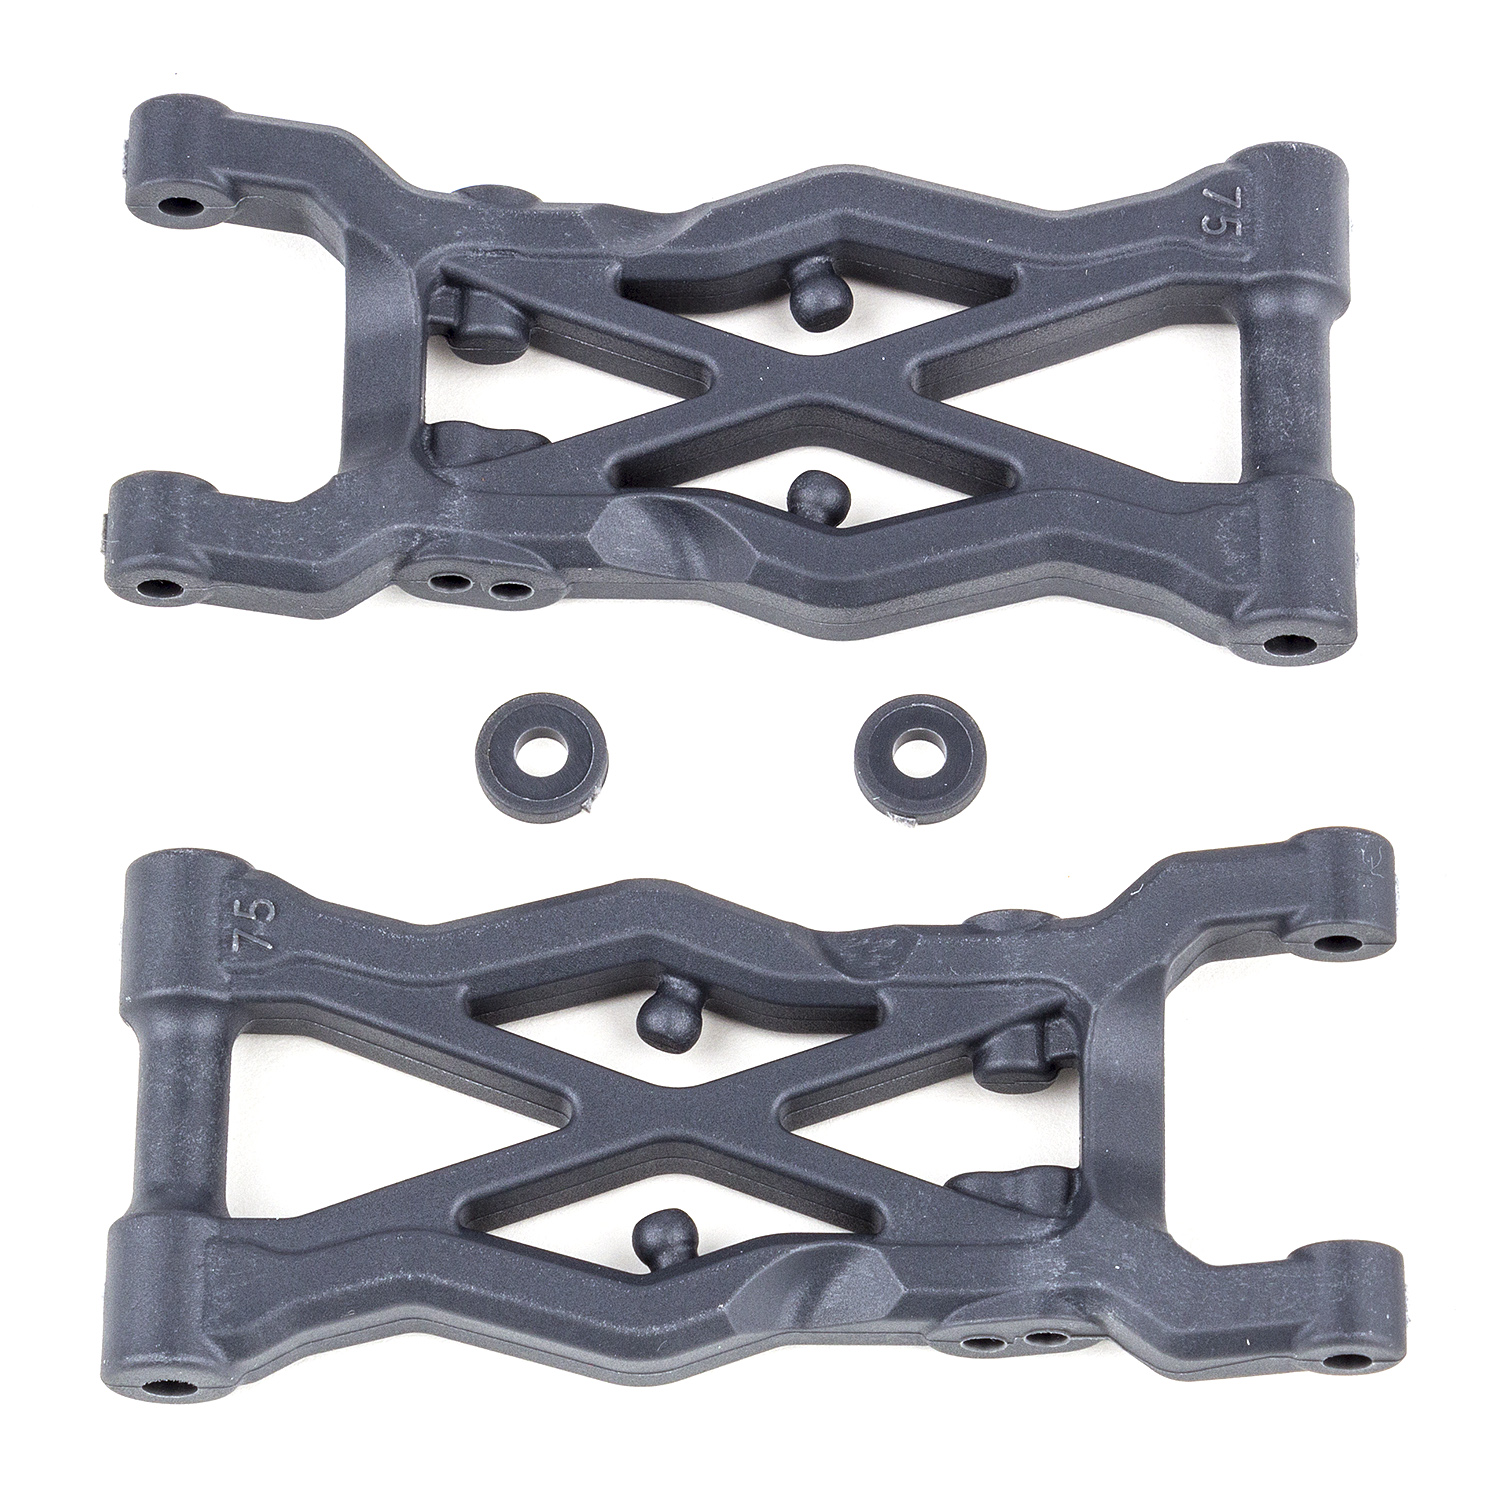 RC10B6.2 Rear Suspension Arms, 75mm, hard